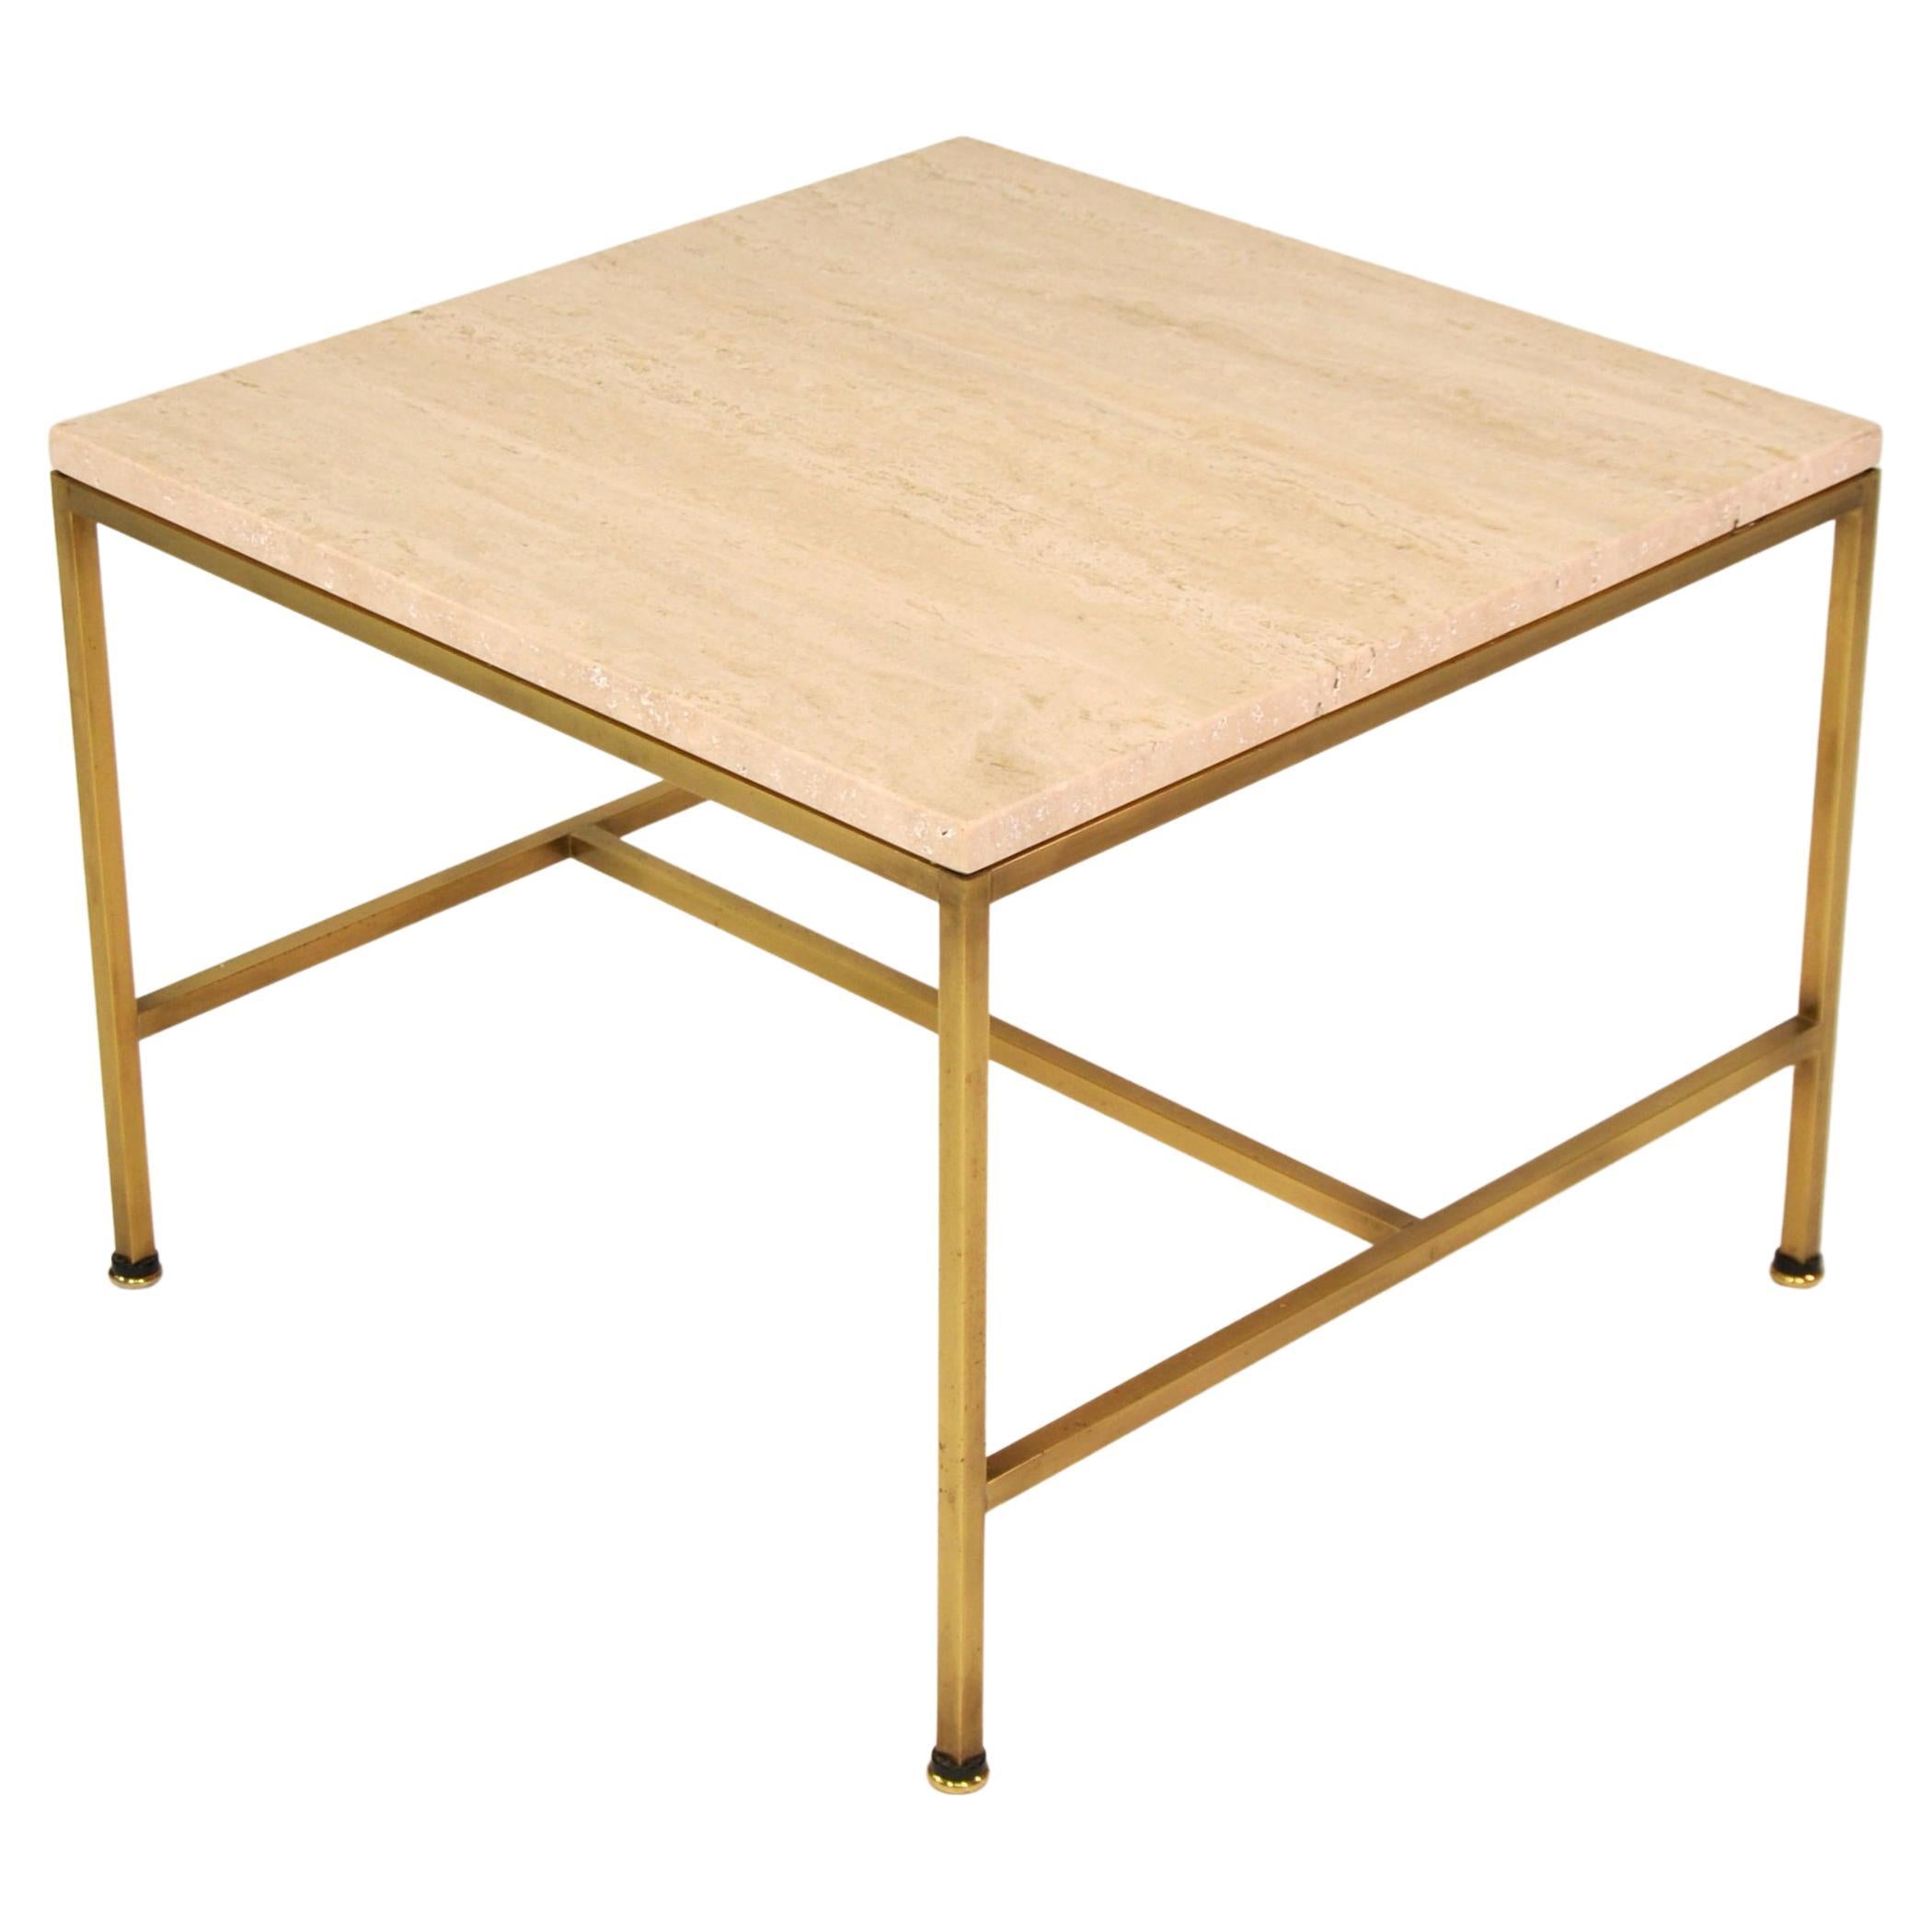 Travertine and Brass Side Table by Paul McCobb for Directional, 1950s For Sale 1